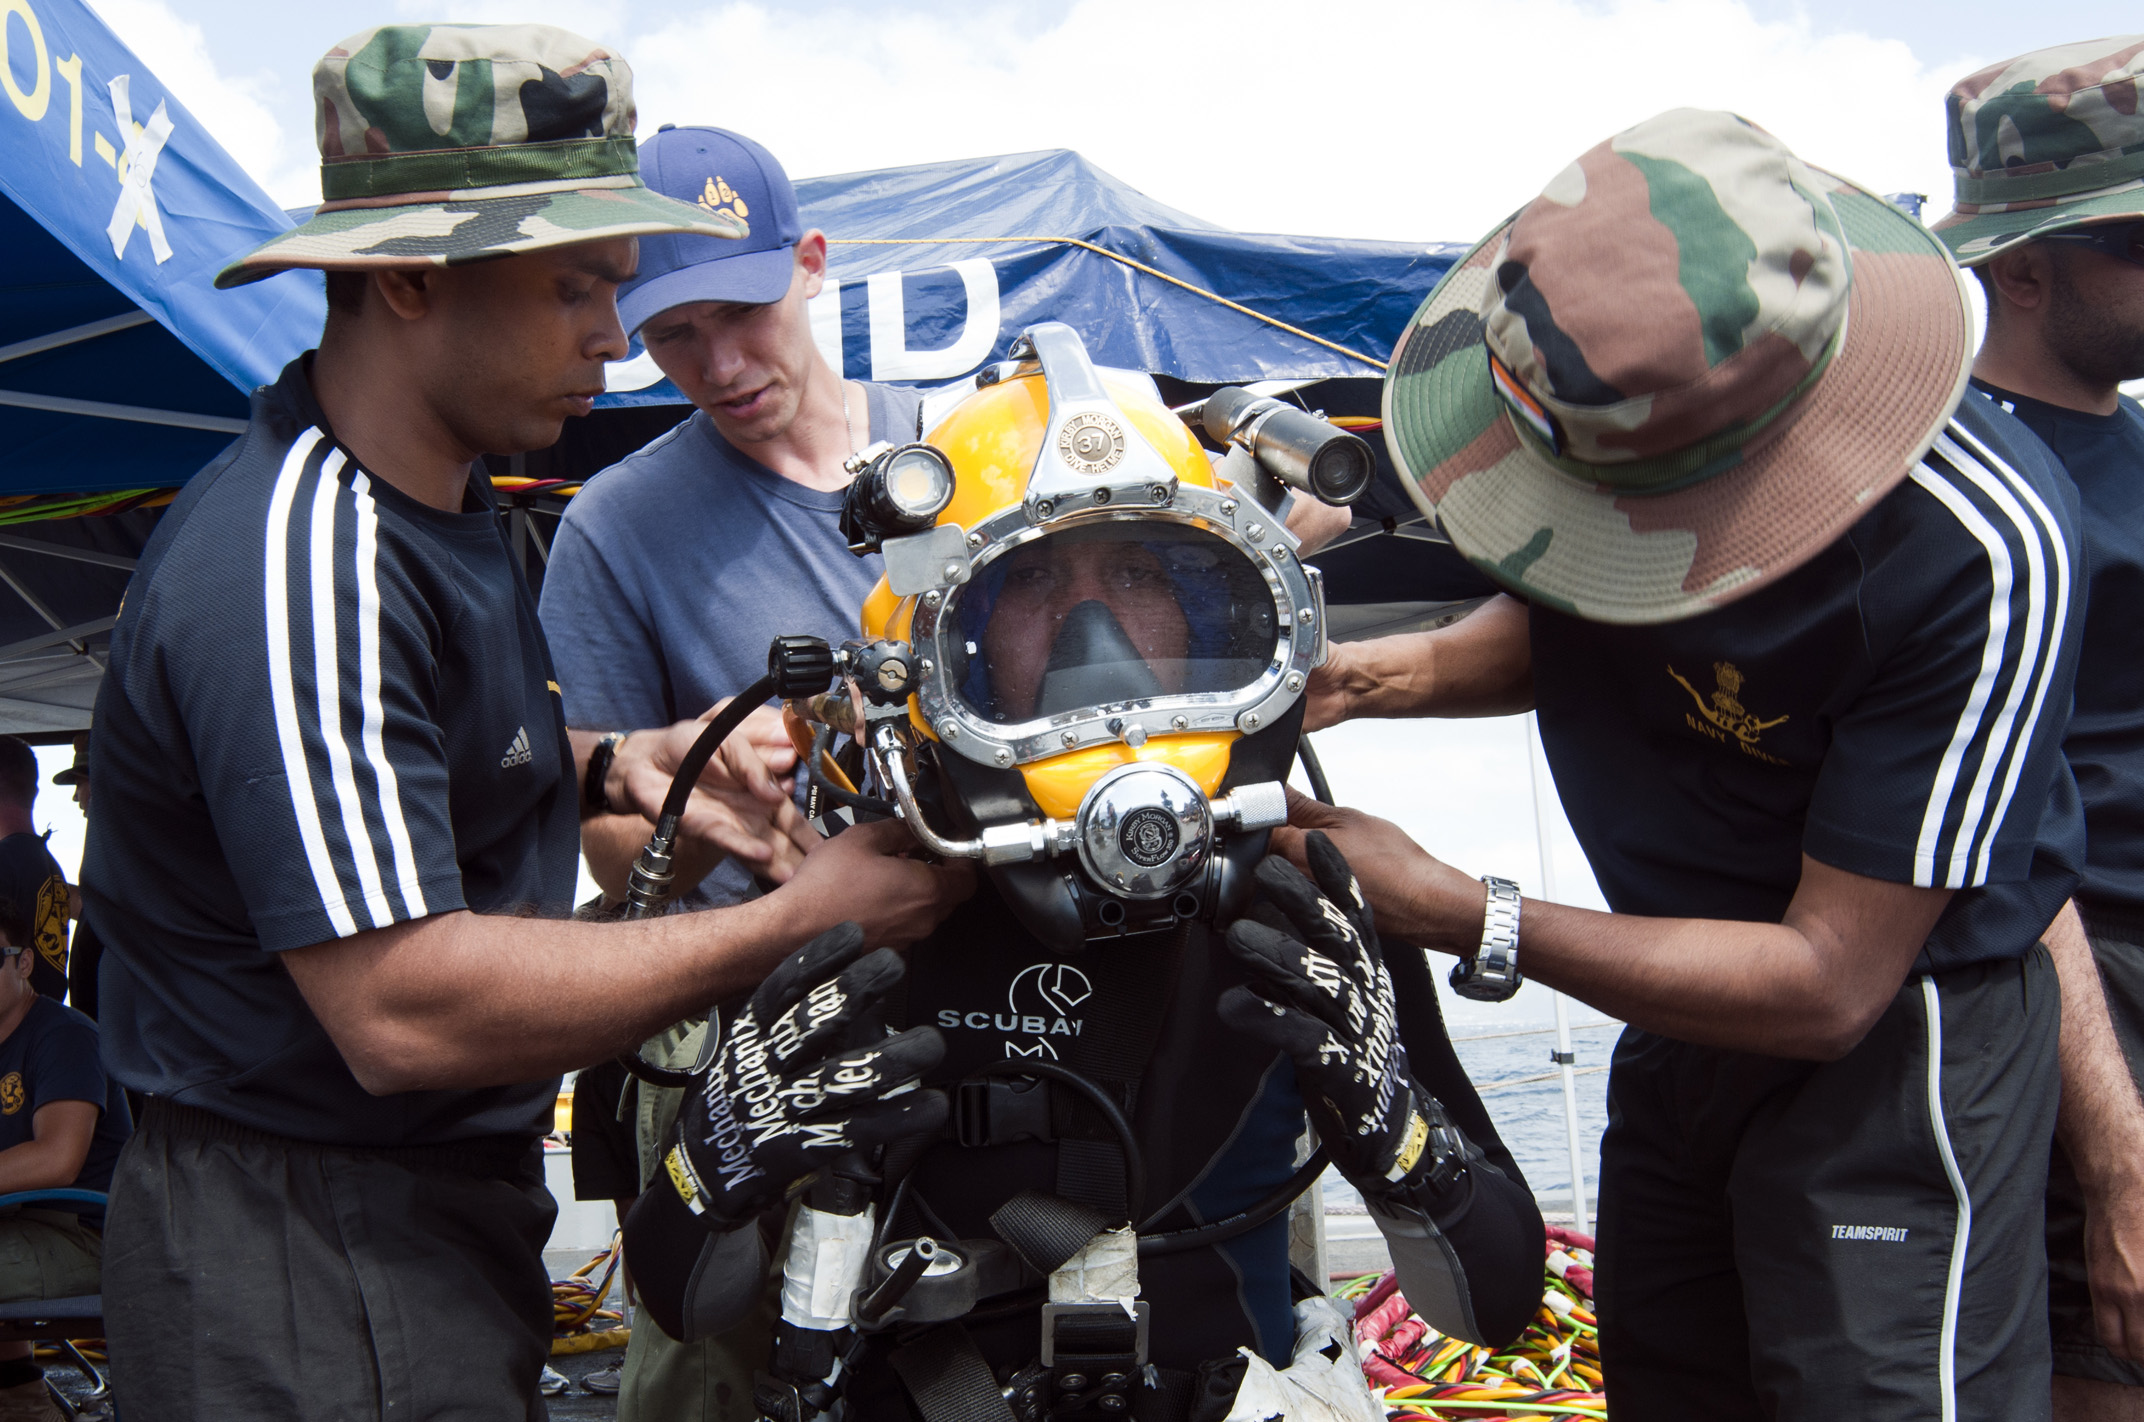 US_Navy_120213-N-WX059-078_Leading_Seaman_Clearance_Diver_2nd_Class_YK_Sharma,_from_the_Indian_navy,_prepares_to_dive_off_the_coast_of_Oahu,_Hawaii.jpg